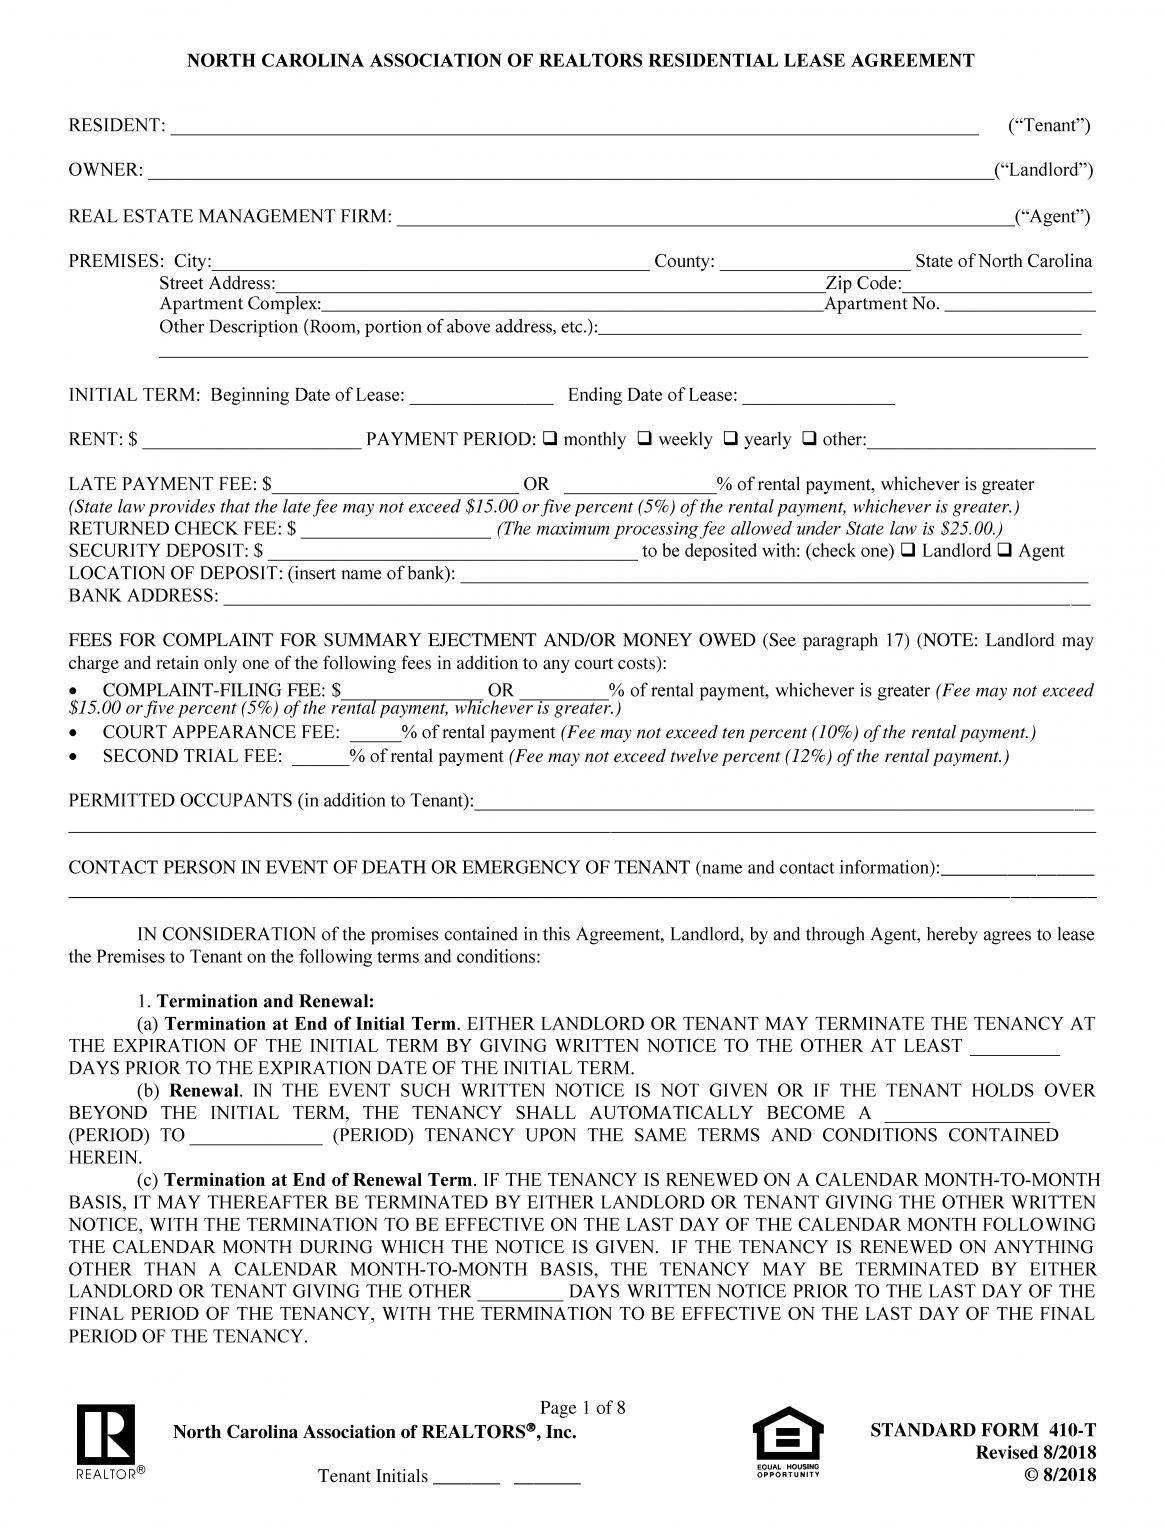 free north carolina standard residential lease agreement north